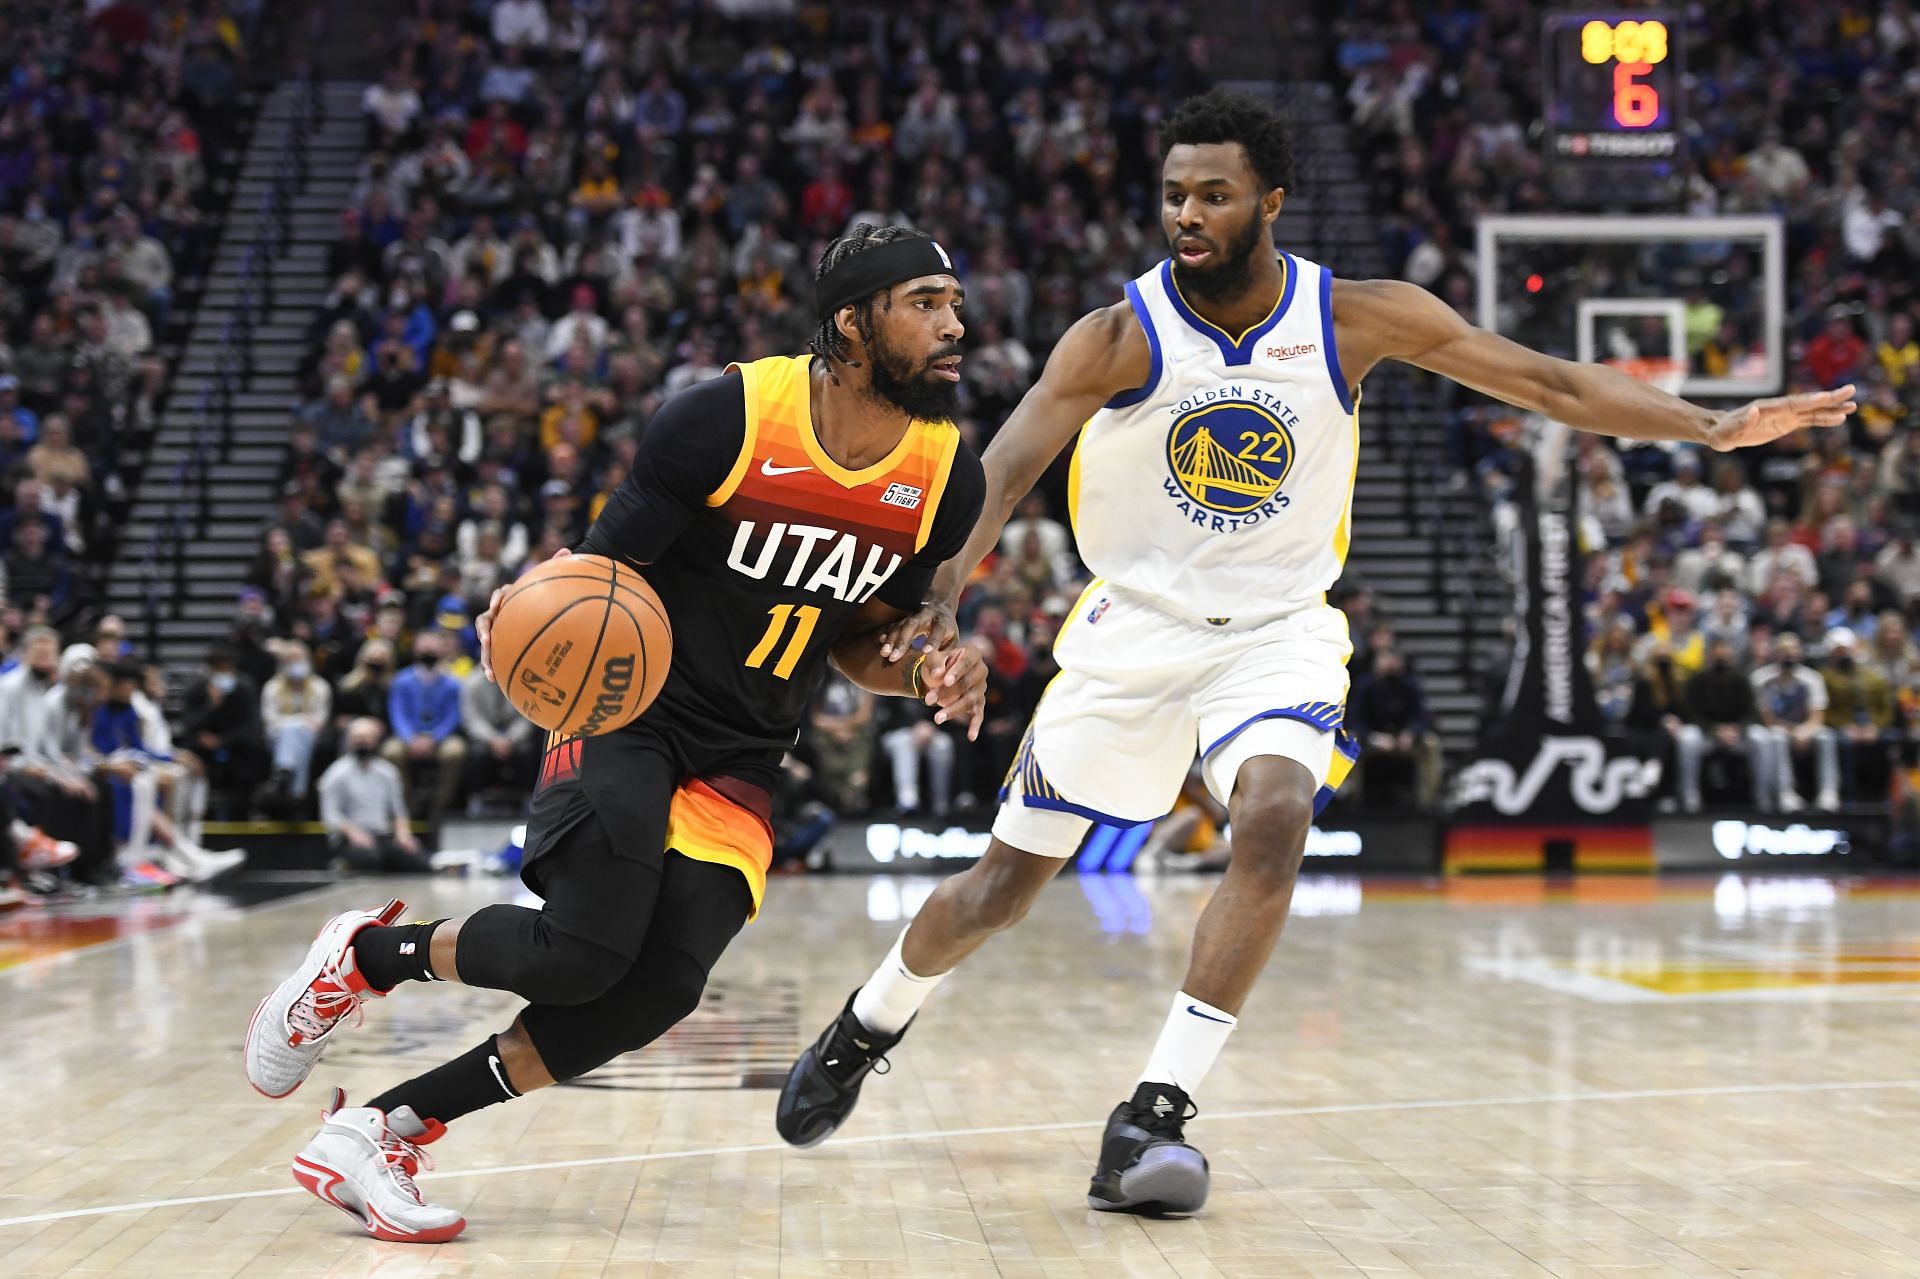 Mike Conley of the Utah Jazz and Andrew Wiggins of the Golden State Warriors